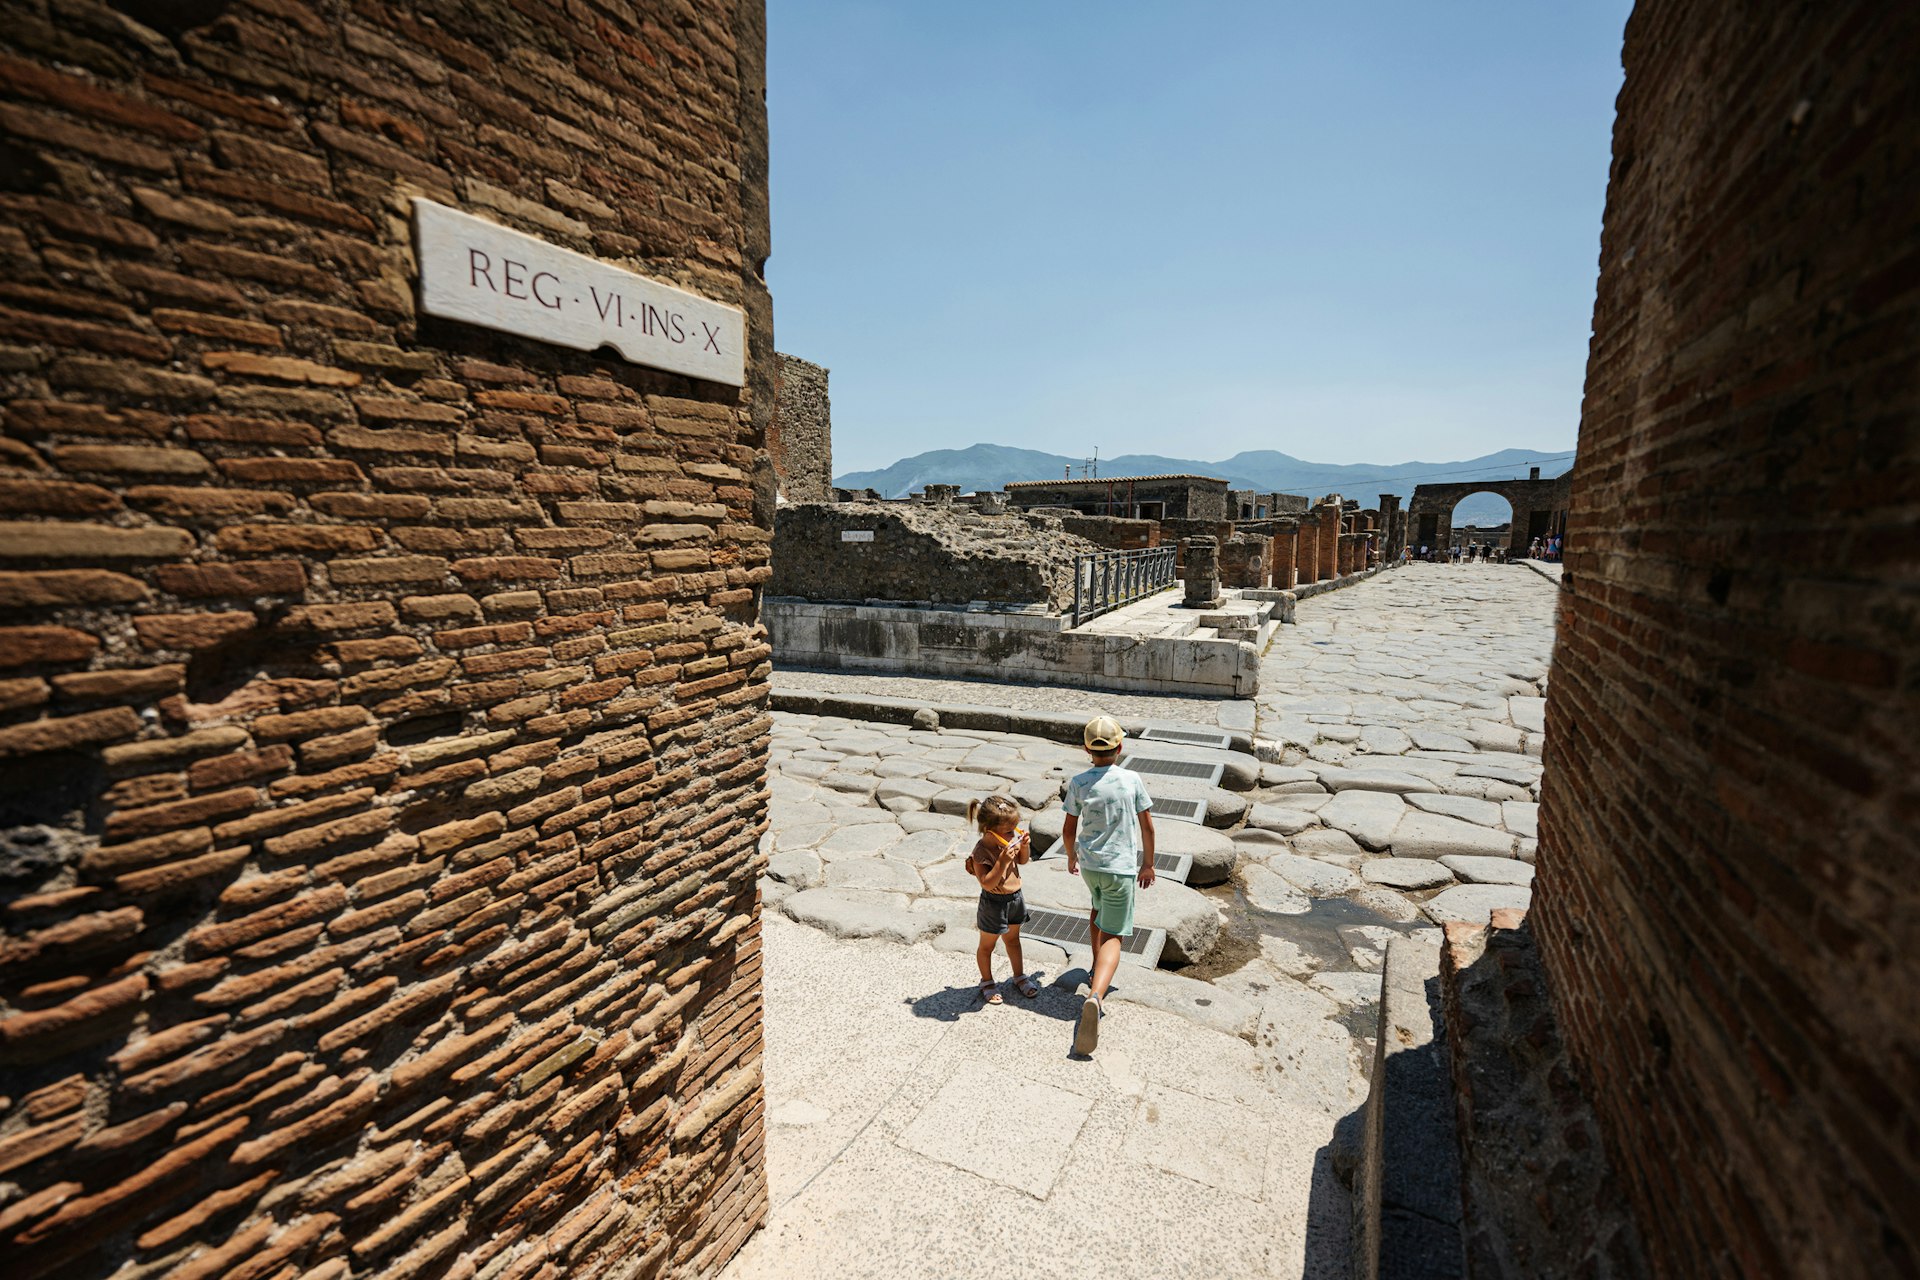 Two young tourists walk a path through an ancient city